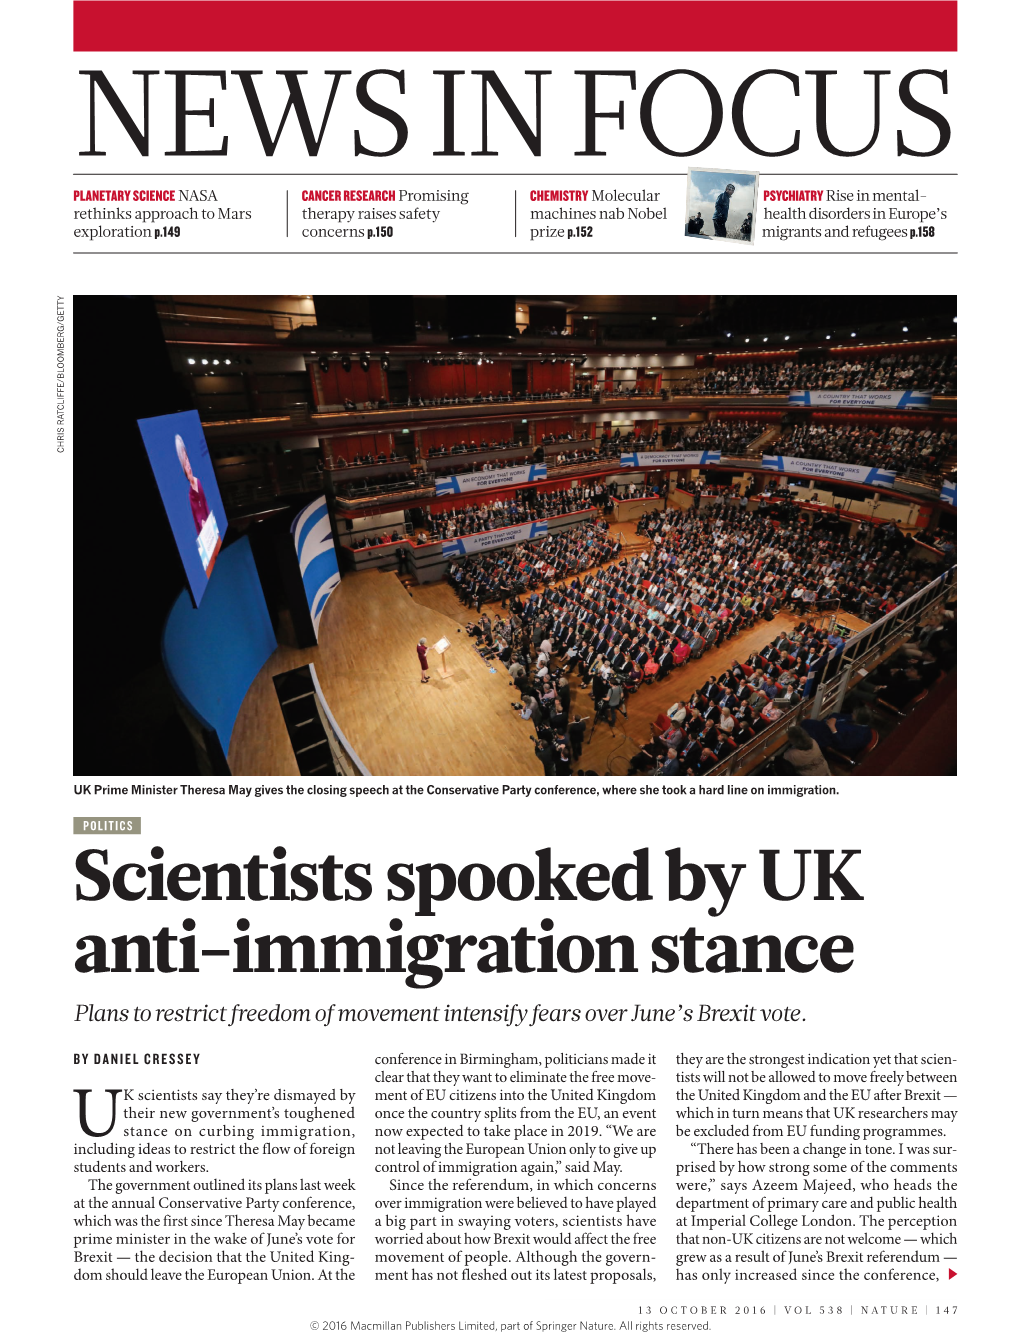 Scientists Spooked by UK Anti-Immigration Stance Plans to Restrict Freedom of Movement Intensify Fears Over June’S Brexit Vote